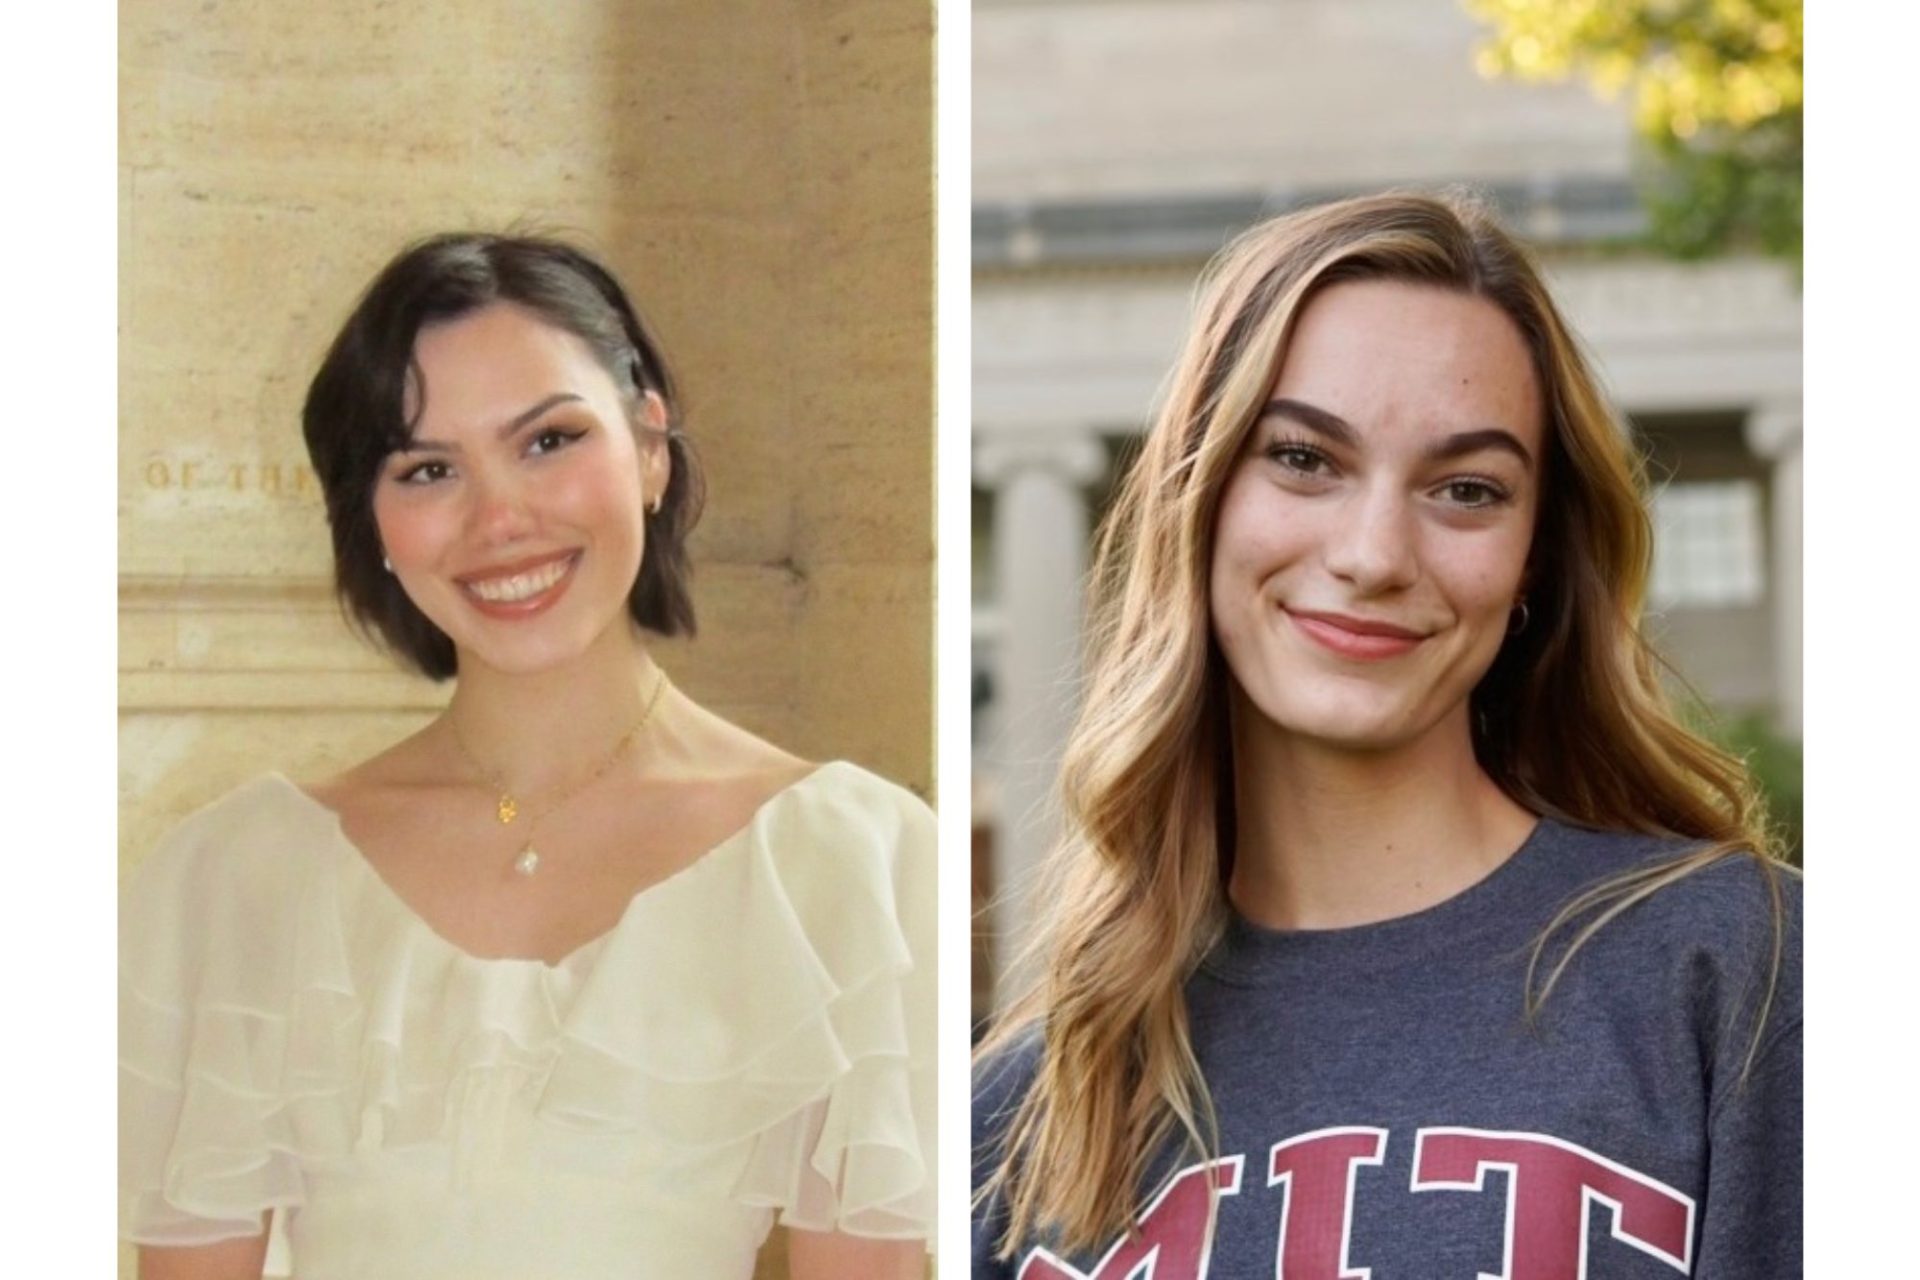 MIT Civil and Environmental Engineering students awarded NSF Graduate Research Fellowships